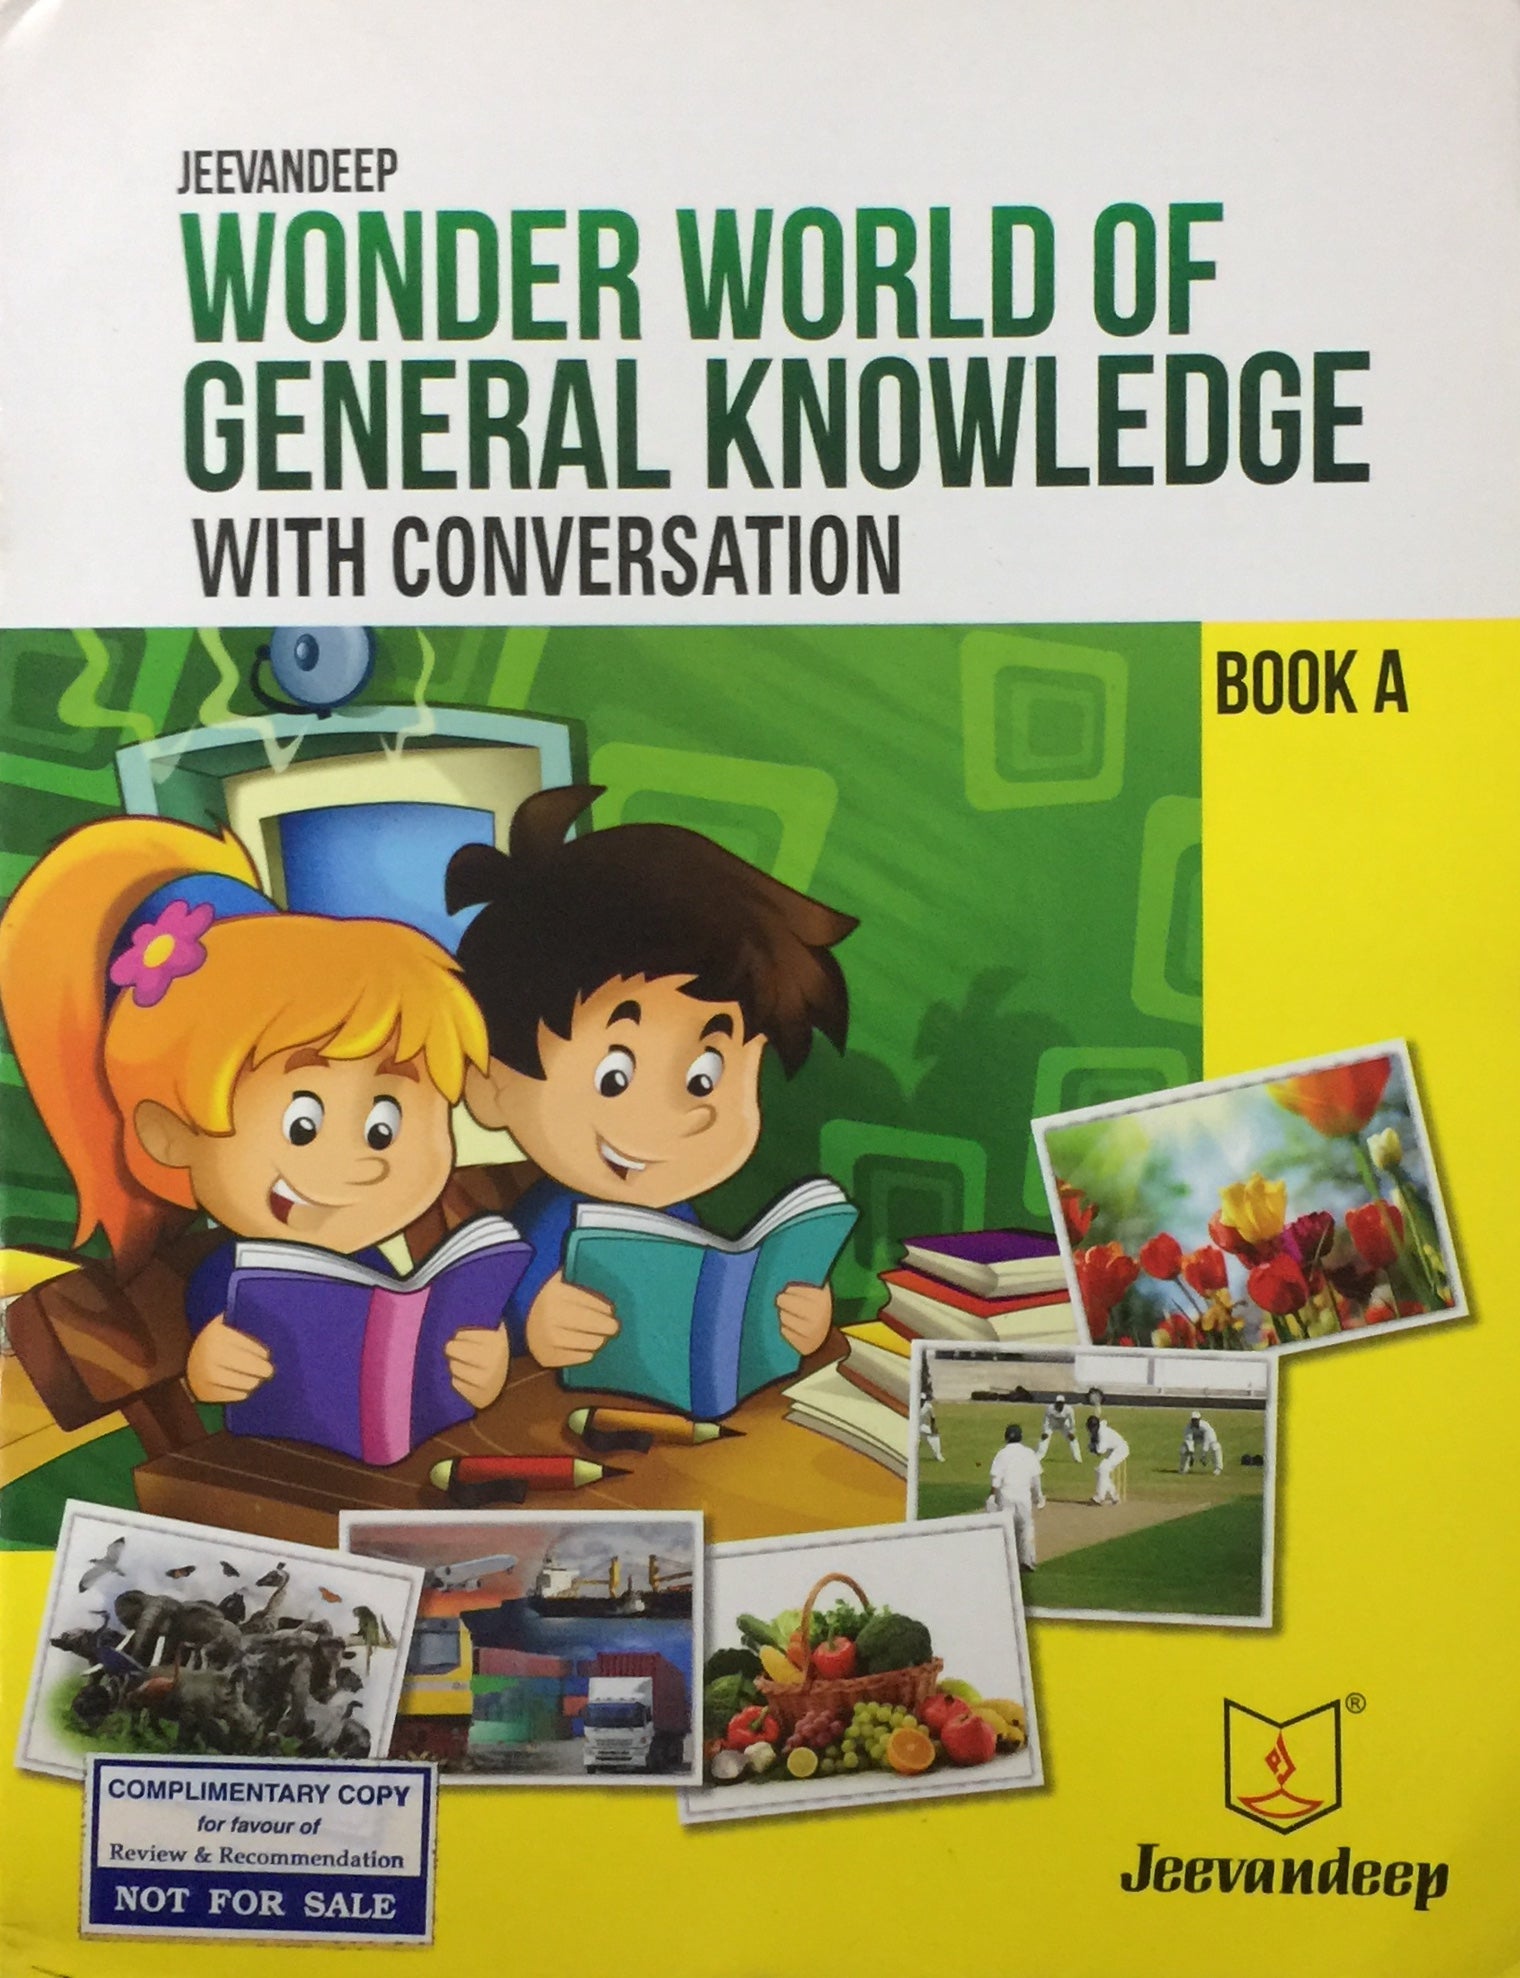 Wonder World of General Knowledge with Conversation Book A  Half Price Books India Books inspire-bookspace.myshopify.com Half Price Books India